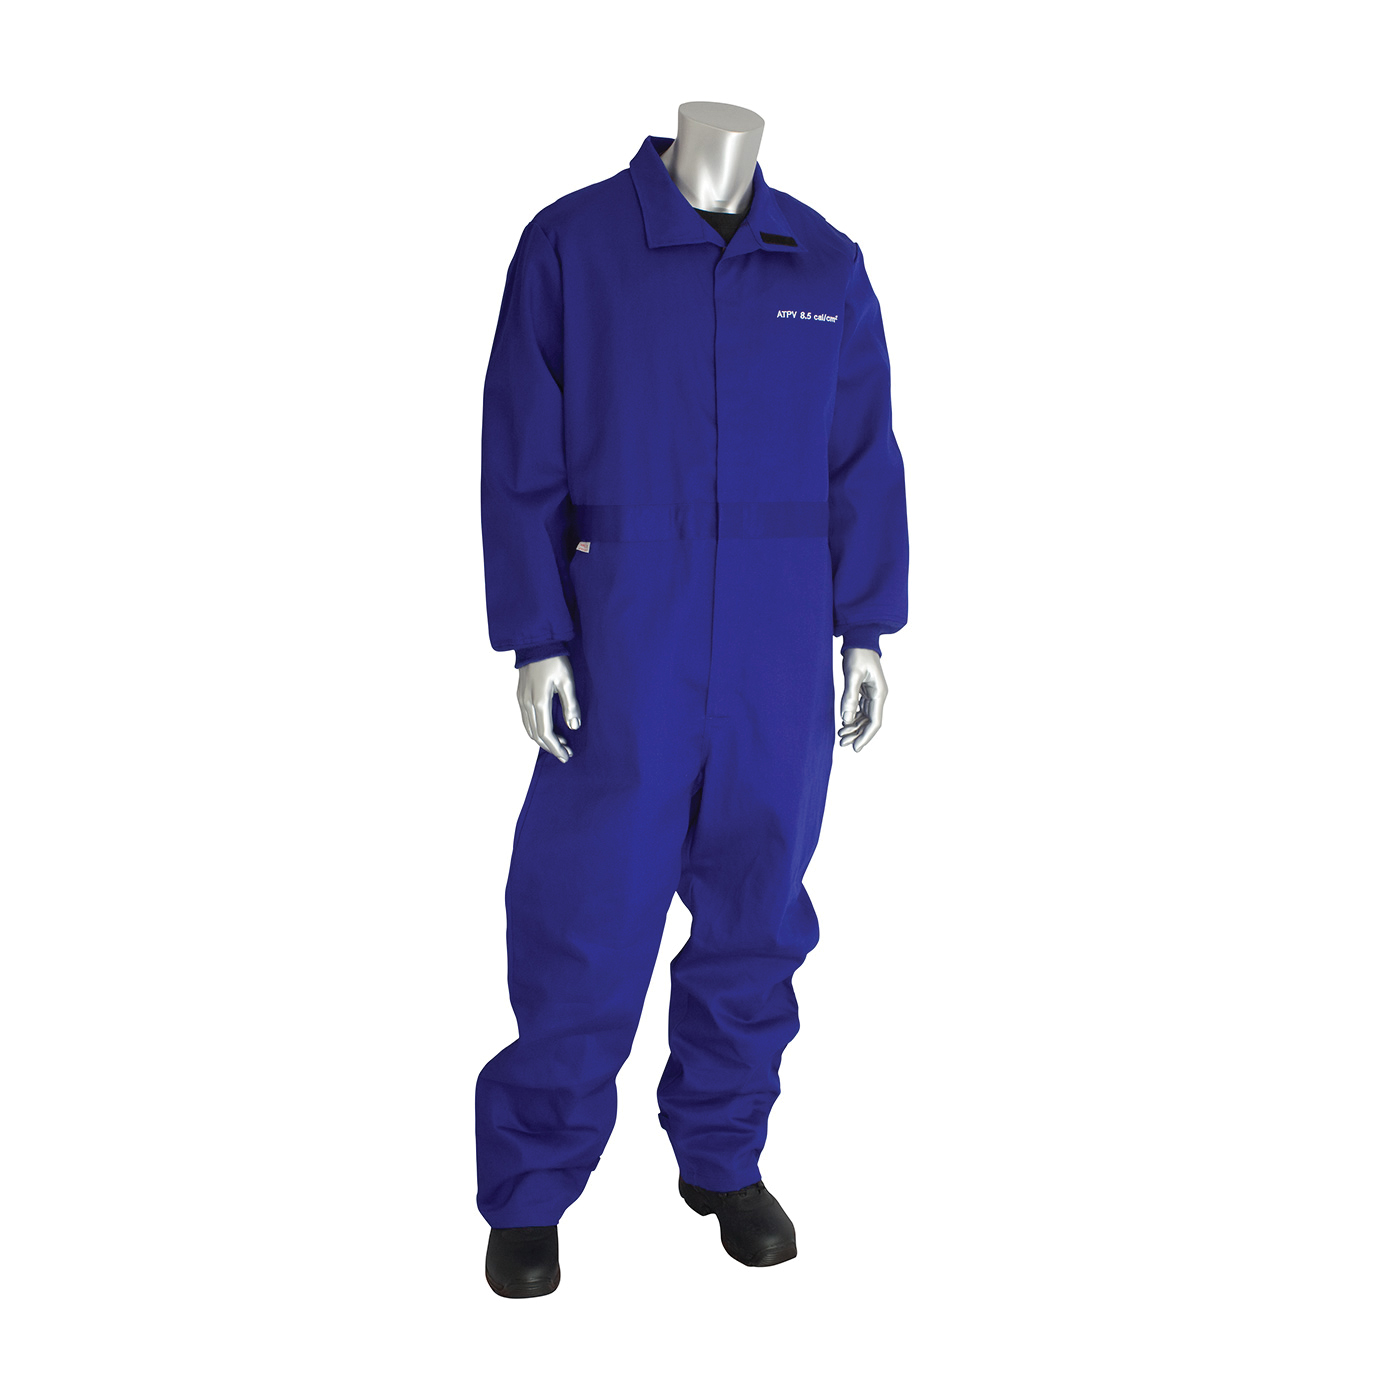 PIP® 9100-2120D/2X Flame Resistant Coverall With Vented Back, 2XL, Royal Blue, 90% Cotton/10% Nylon/FR Twill Weave, 52 to 54 in Chest, 32 in L Inseam